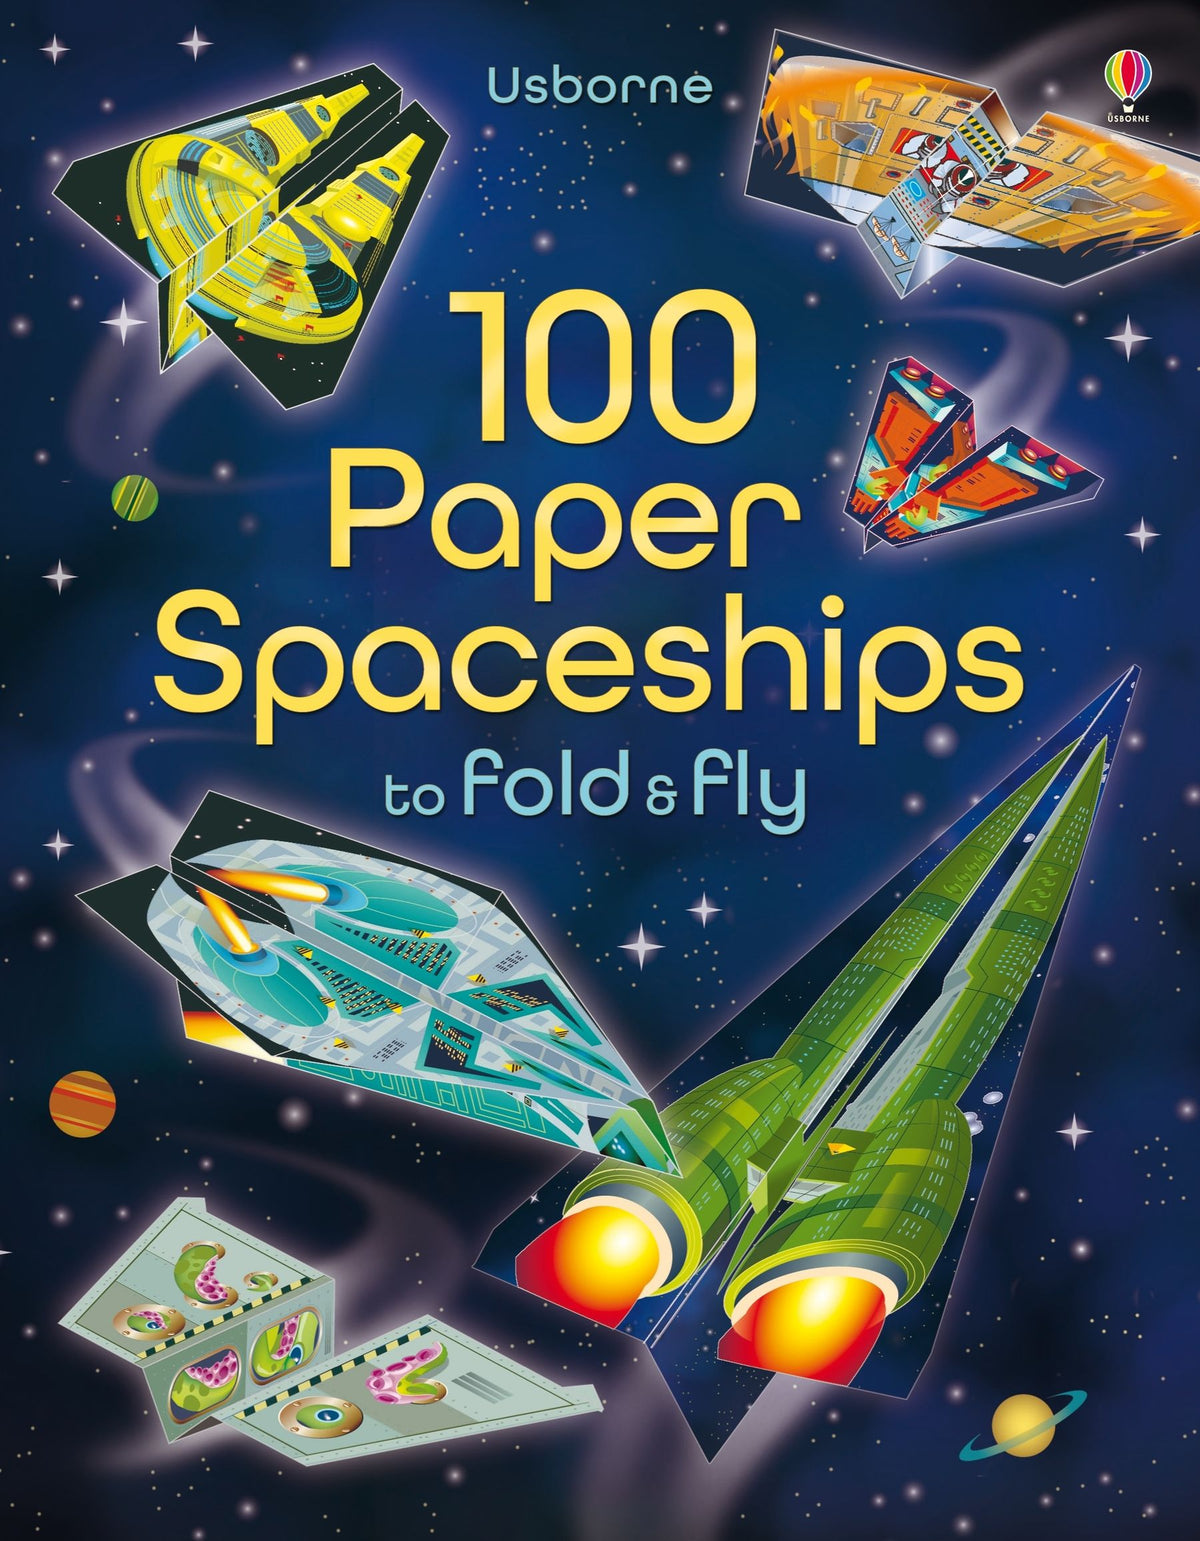 100 Paper Spaceships Cover